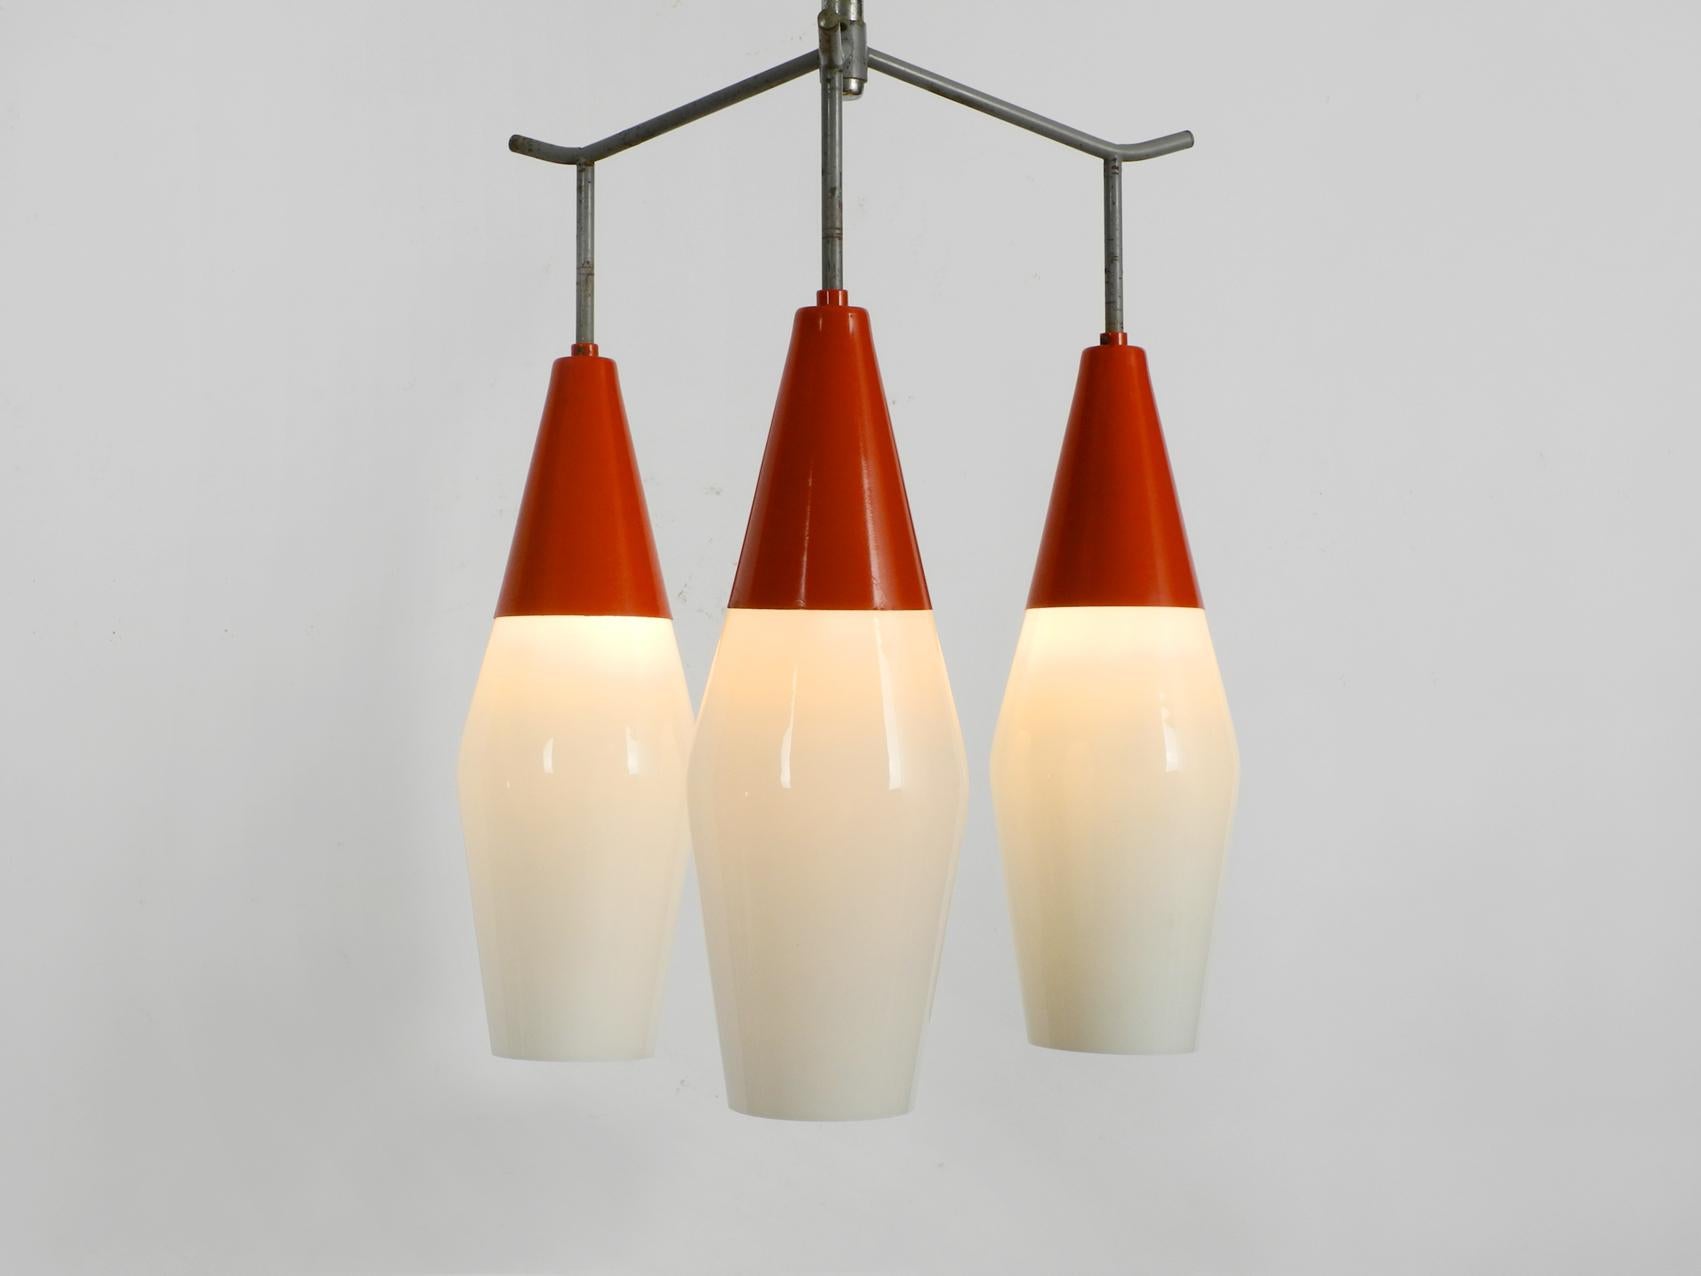 Very rare midcentury Industrial ceiling lamp by Josef Hurka for Napako.
The frame is made of metal, the three shades are made of high quality thick glasses.
Very nice minimalistic design with great patina. Made in the Czech Republic.
100%